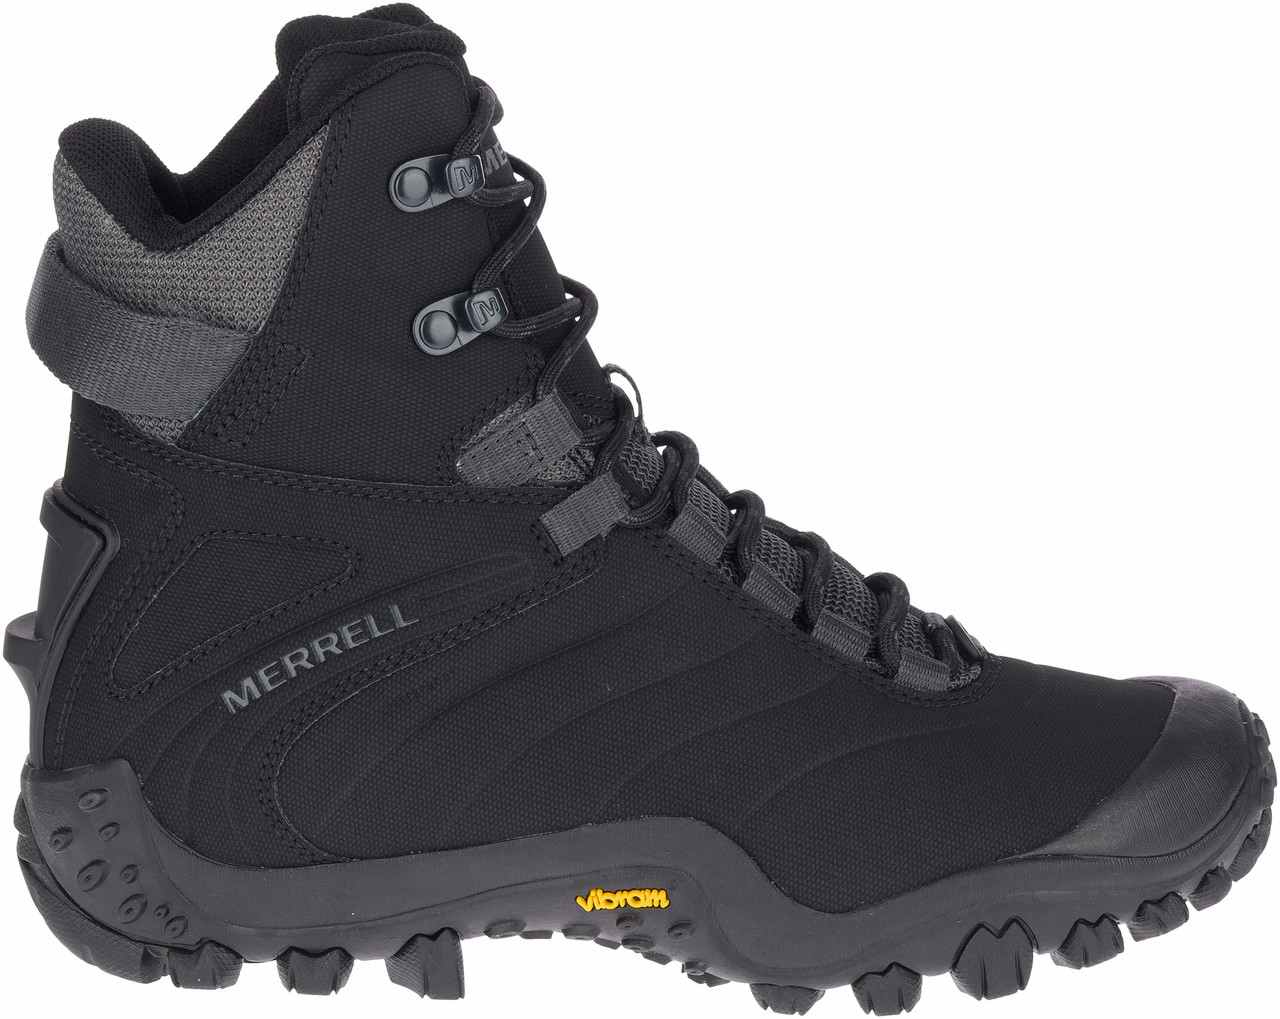 Cham 8 Thermo Tall Waterproof Winter Boots Black/Rock